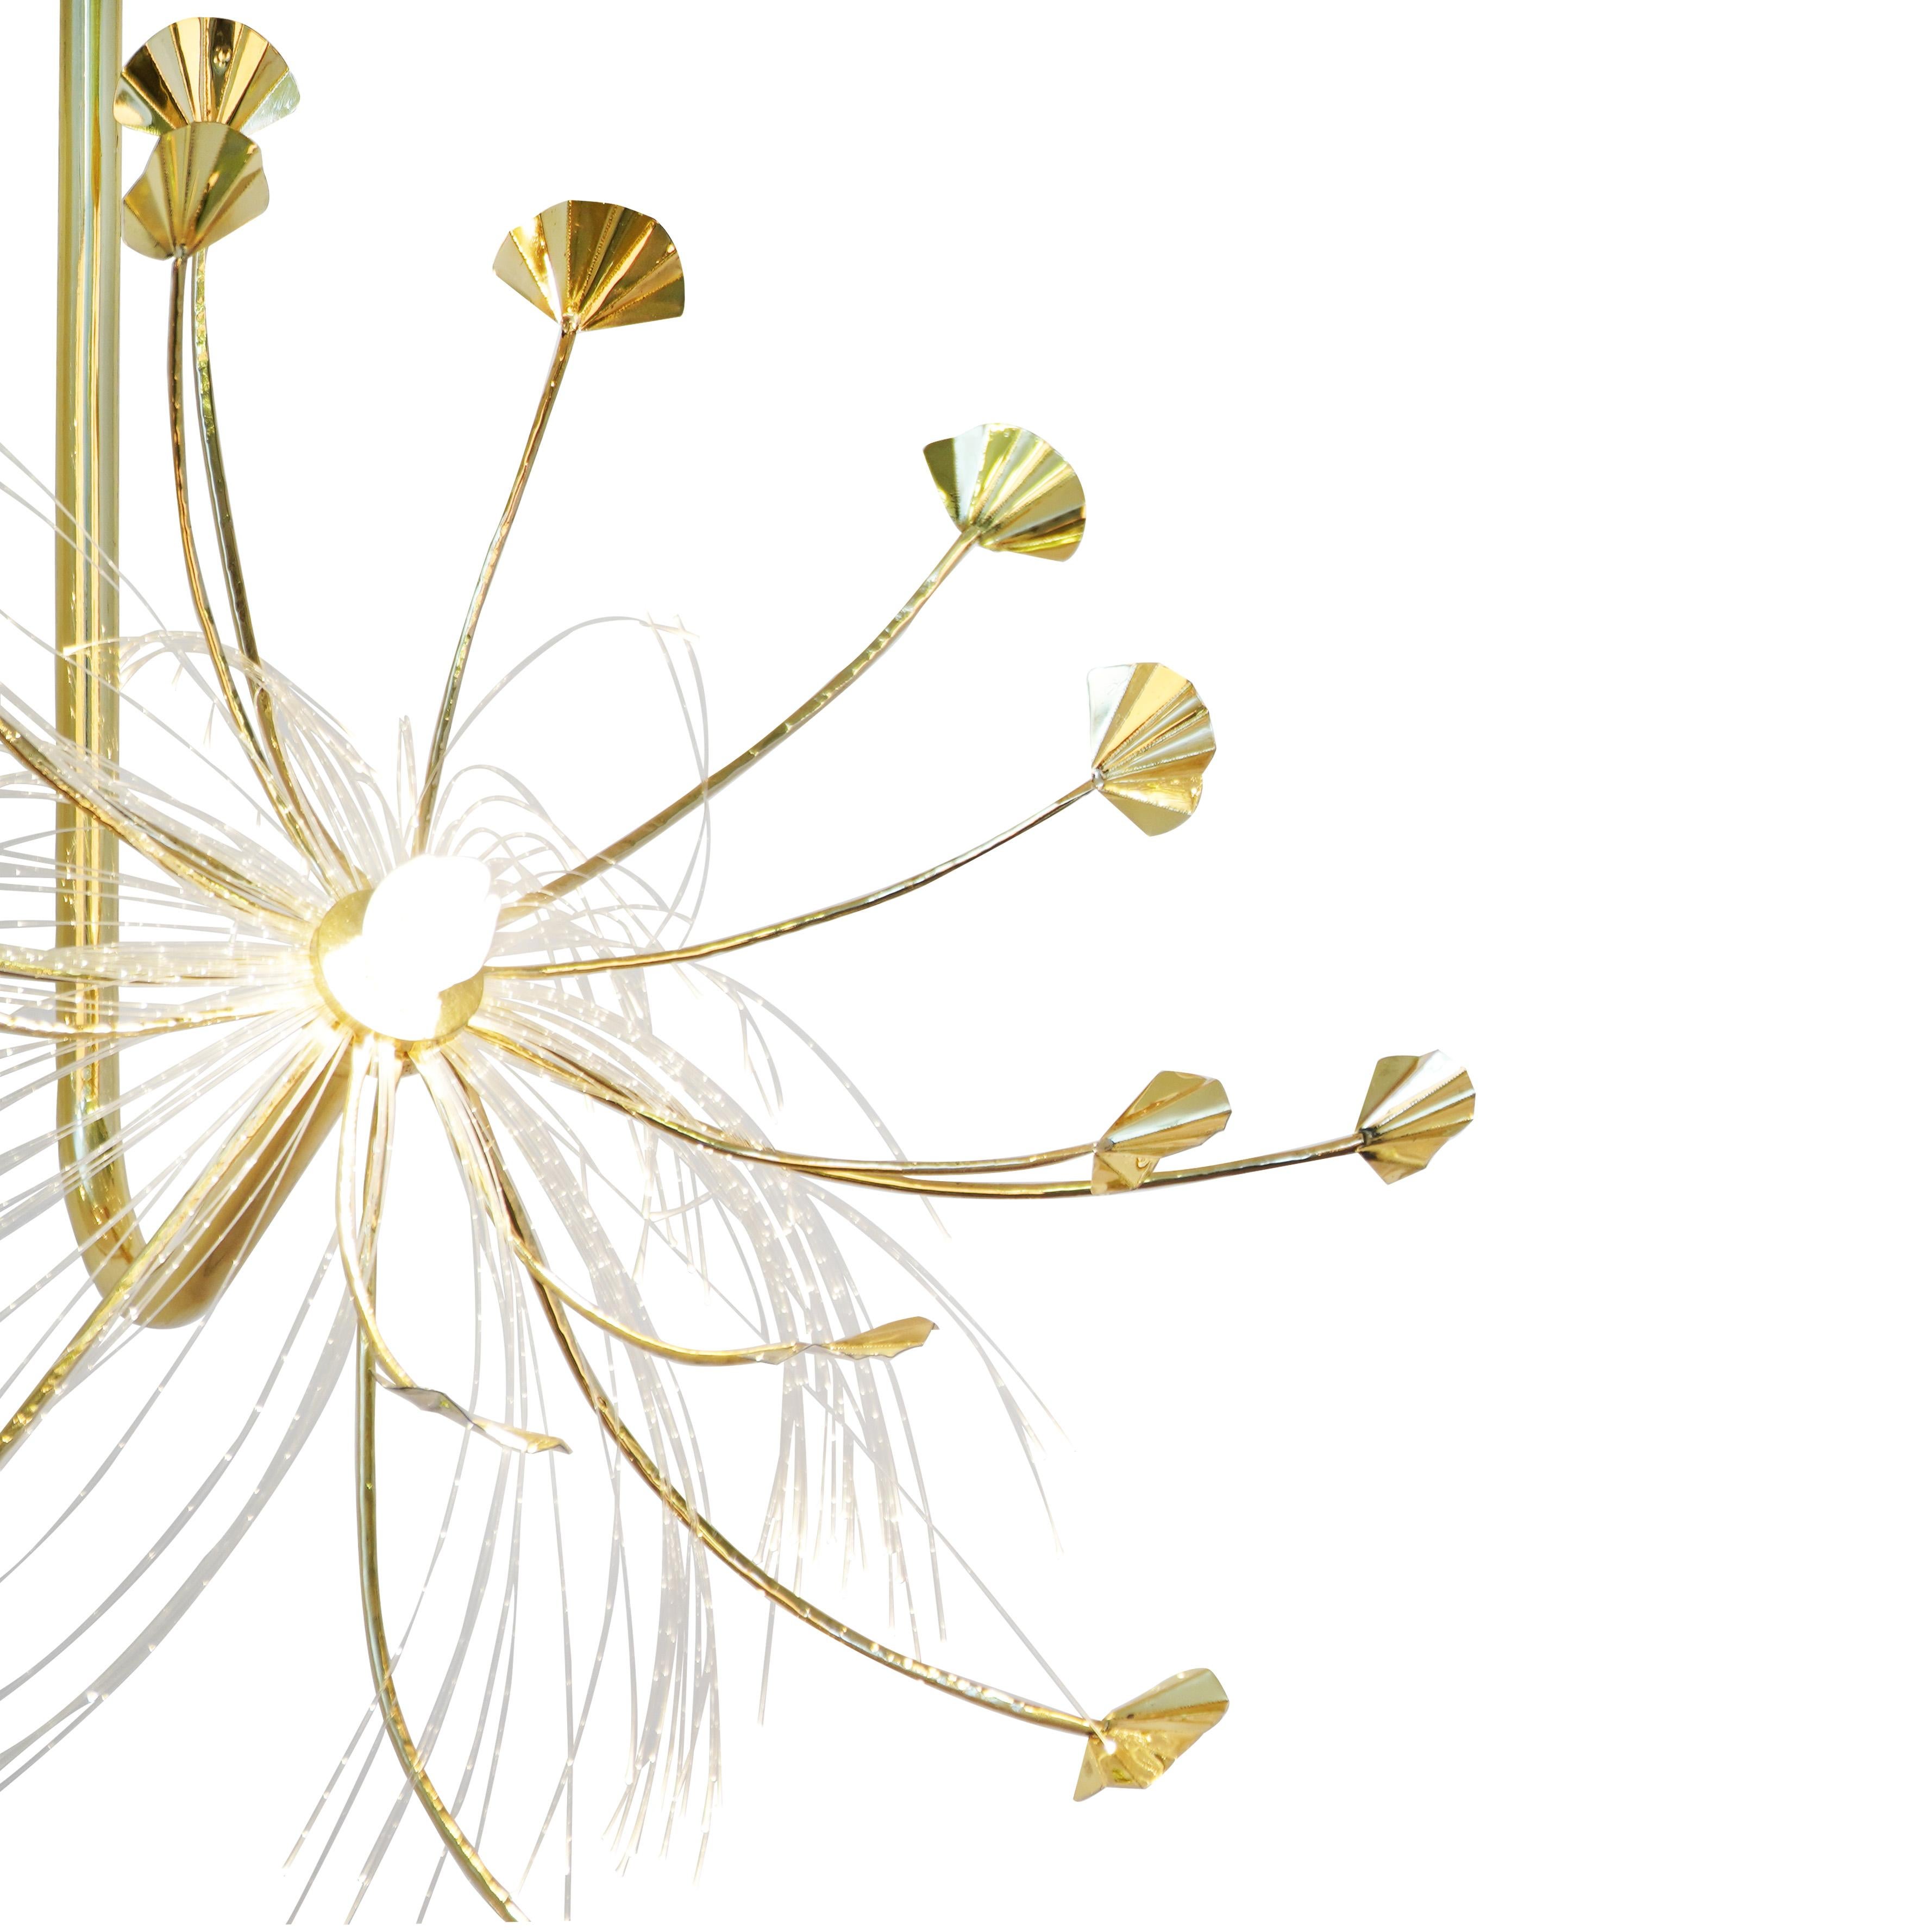 The masterpiece.

Echoing the graceful shape of blossoming dandelion flowers, Wish pendant brings ethereal beauty with the myriad of pathways of the optic fibers. Marvel at these delicate blooms to light up amazing corners home.

Its ethereal